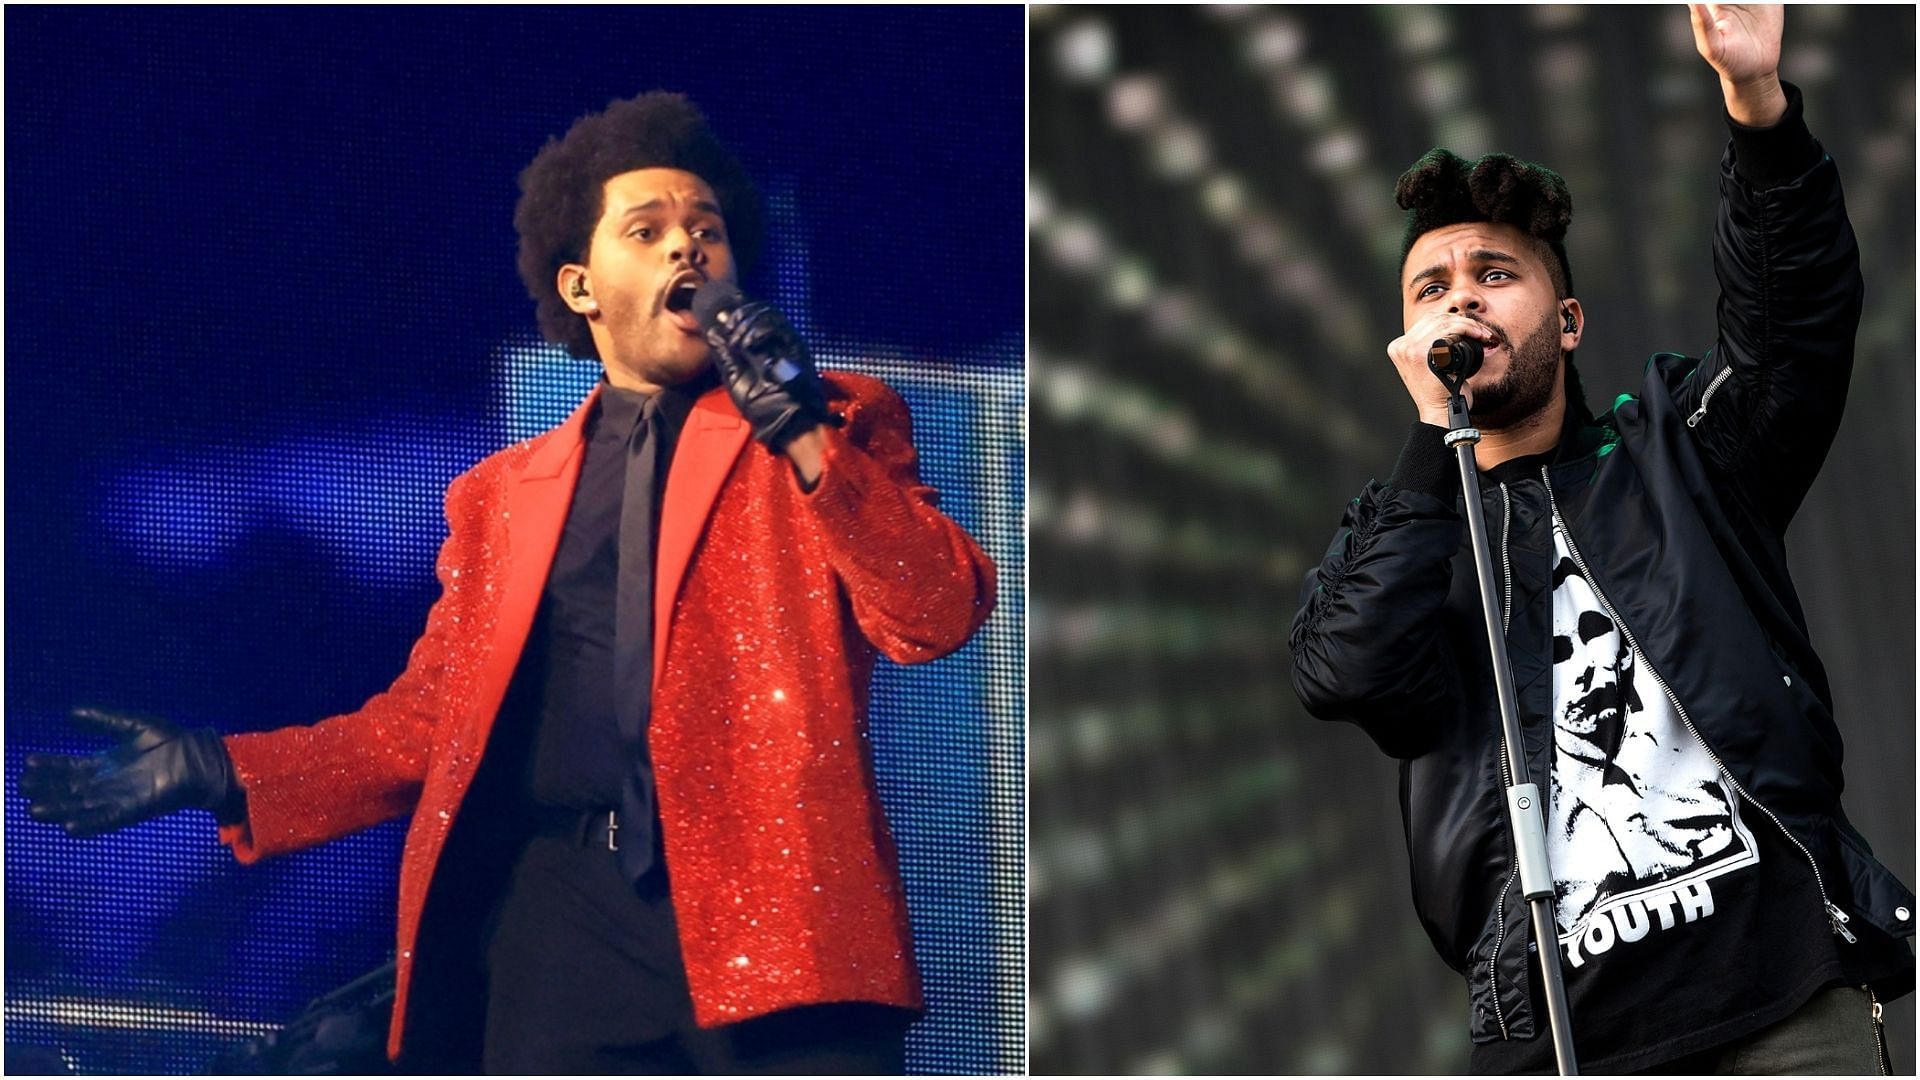 The weeknd has partnered with Binance for his upcoming tour. (Images via Mike Ehrman and Mike Lewis / Getty)